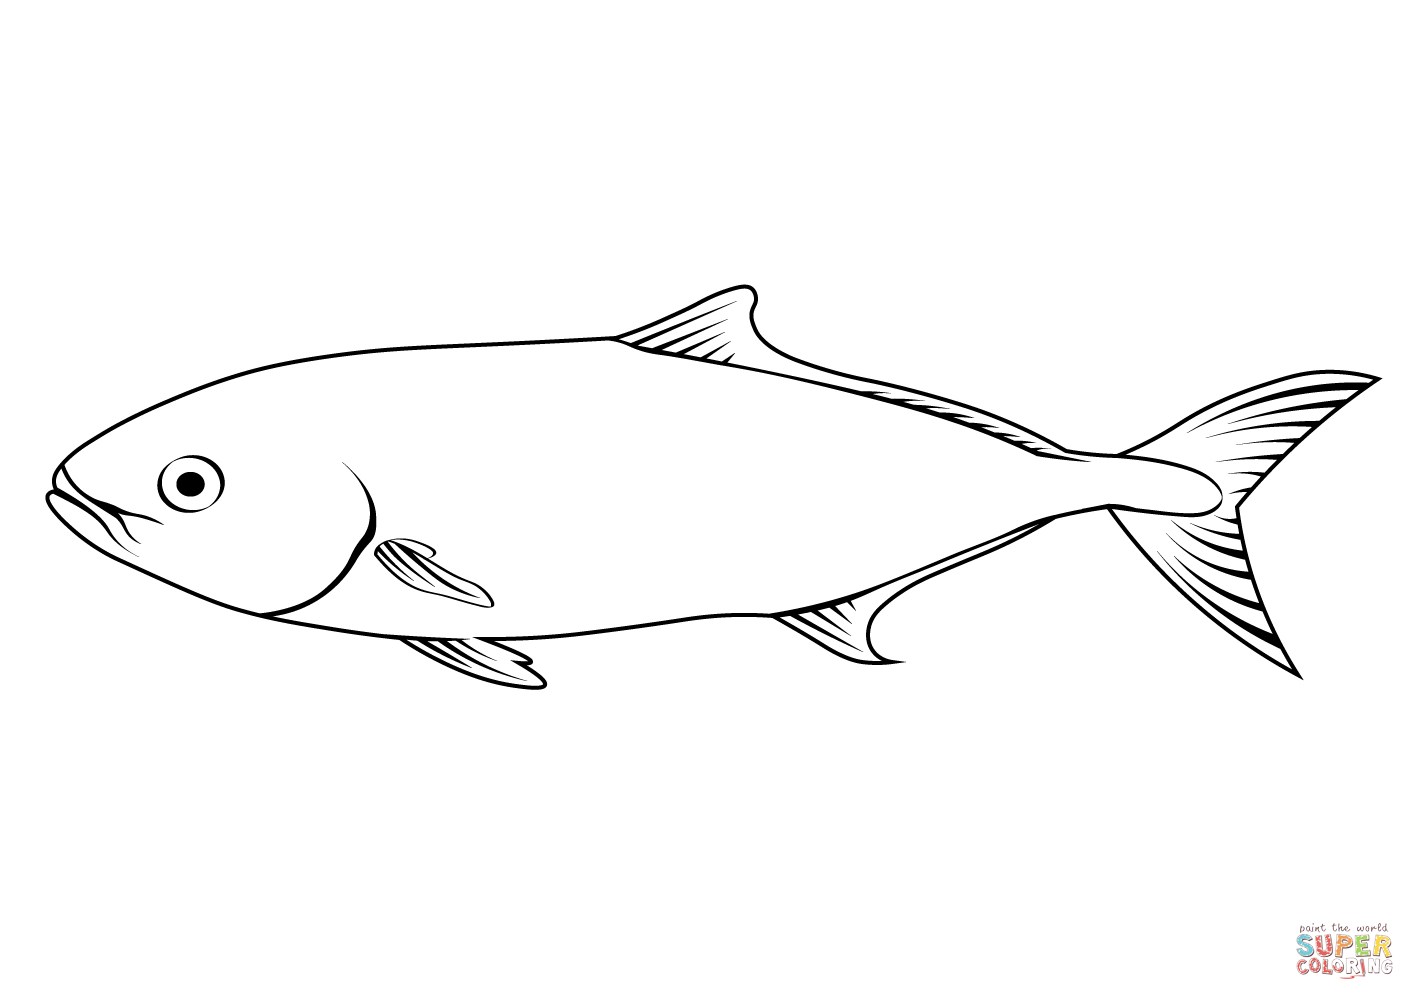 Greater amberjack seriola dumerili coloring page free printable coloring pages